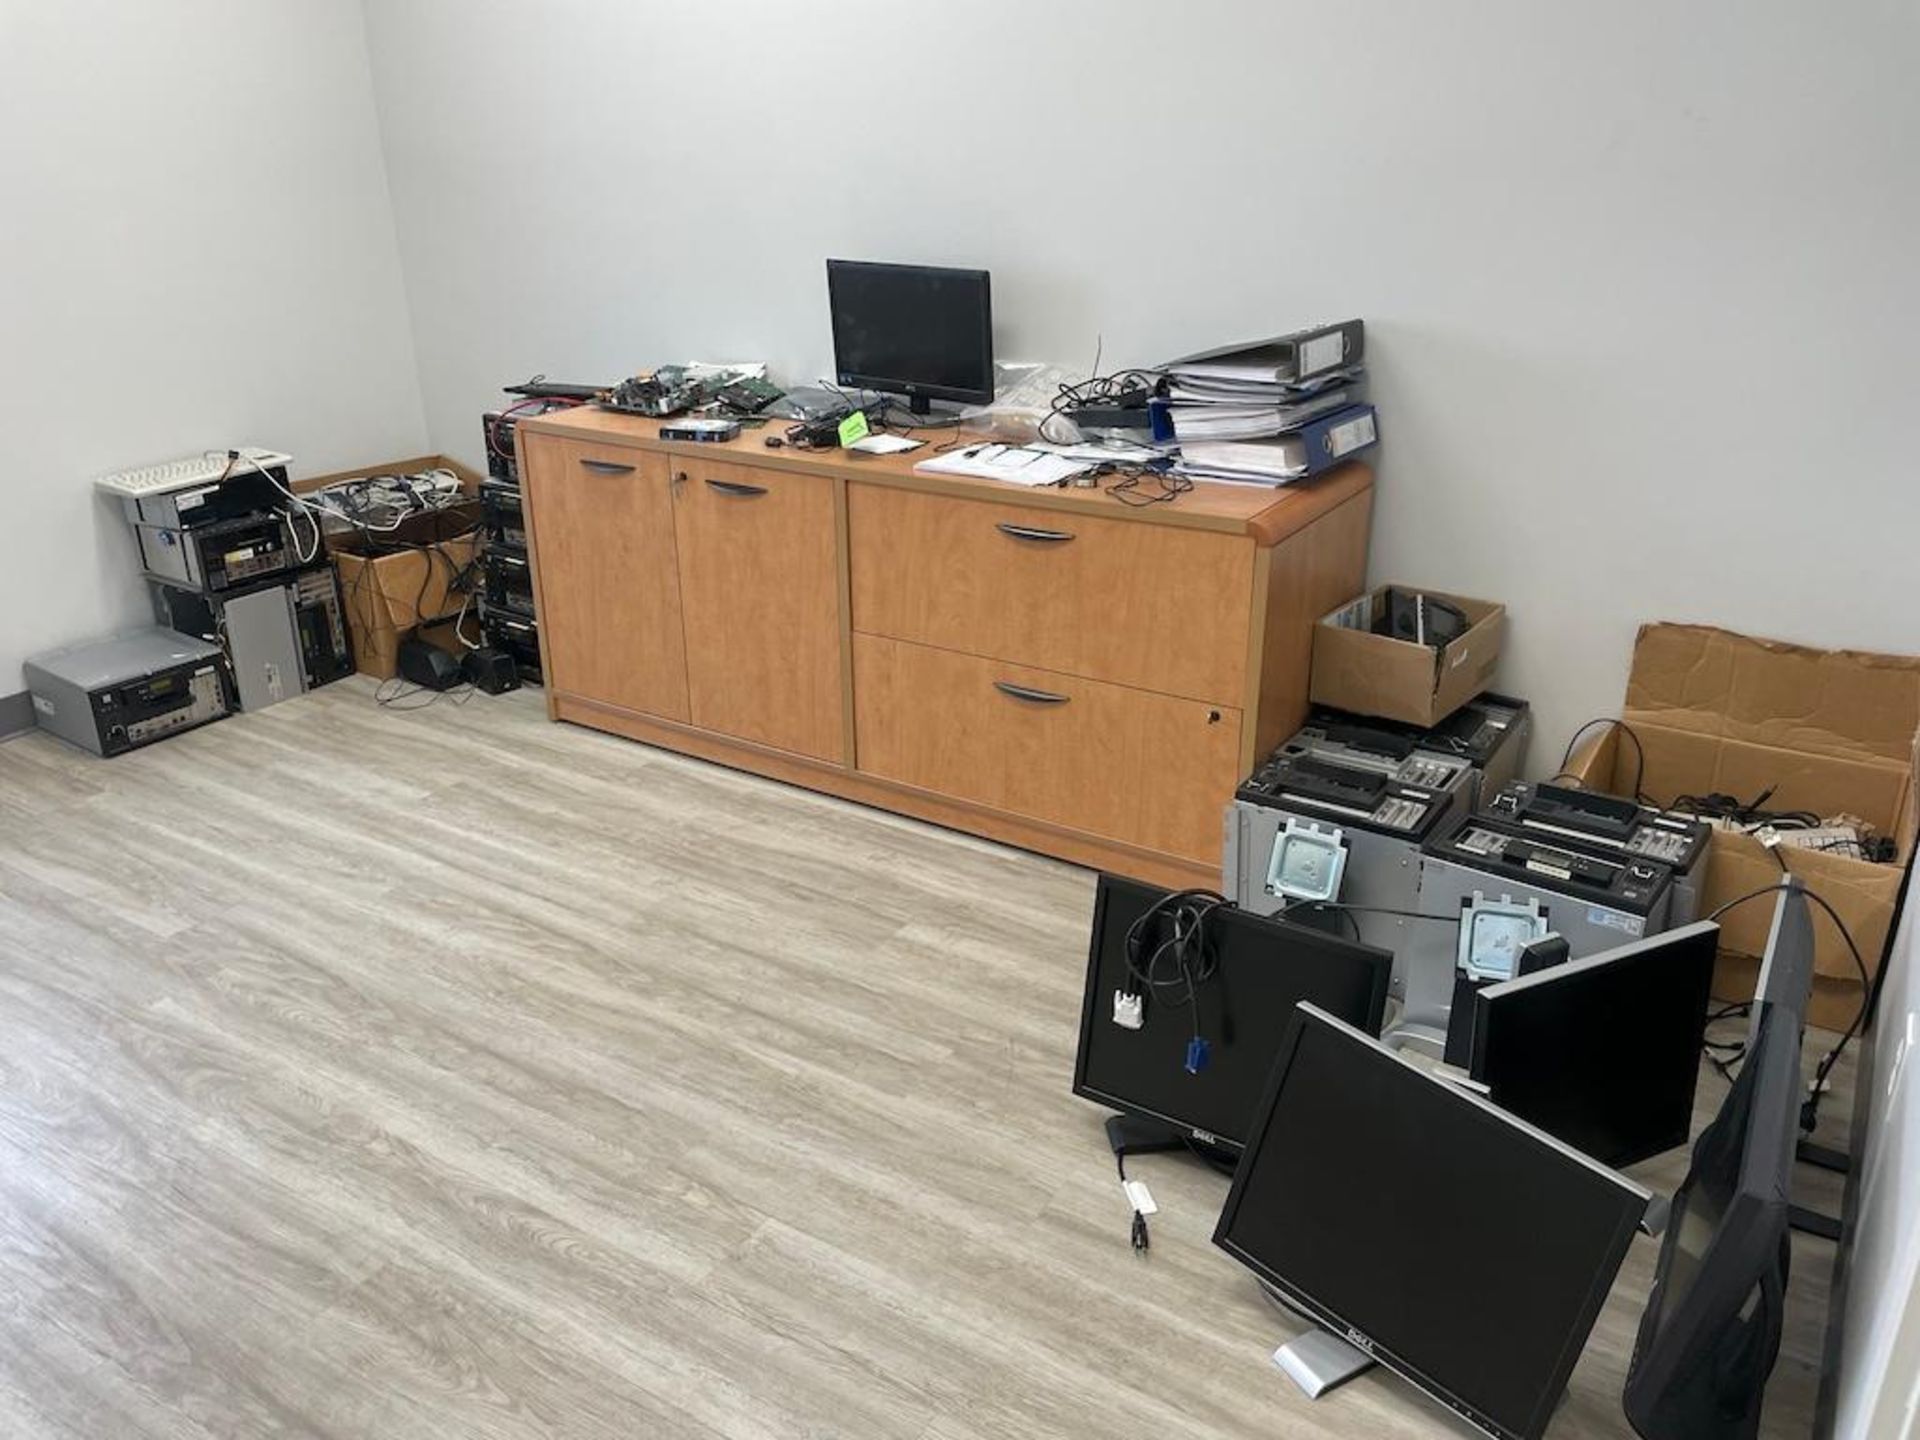 SERVER ROOM W COMPUTER EQUIPMENT IN OFFICE [TROIS RIVIERES]*PLEASE NOTE, EXCLUSIVE RIGGING FEE OF $5